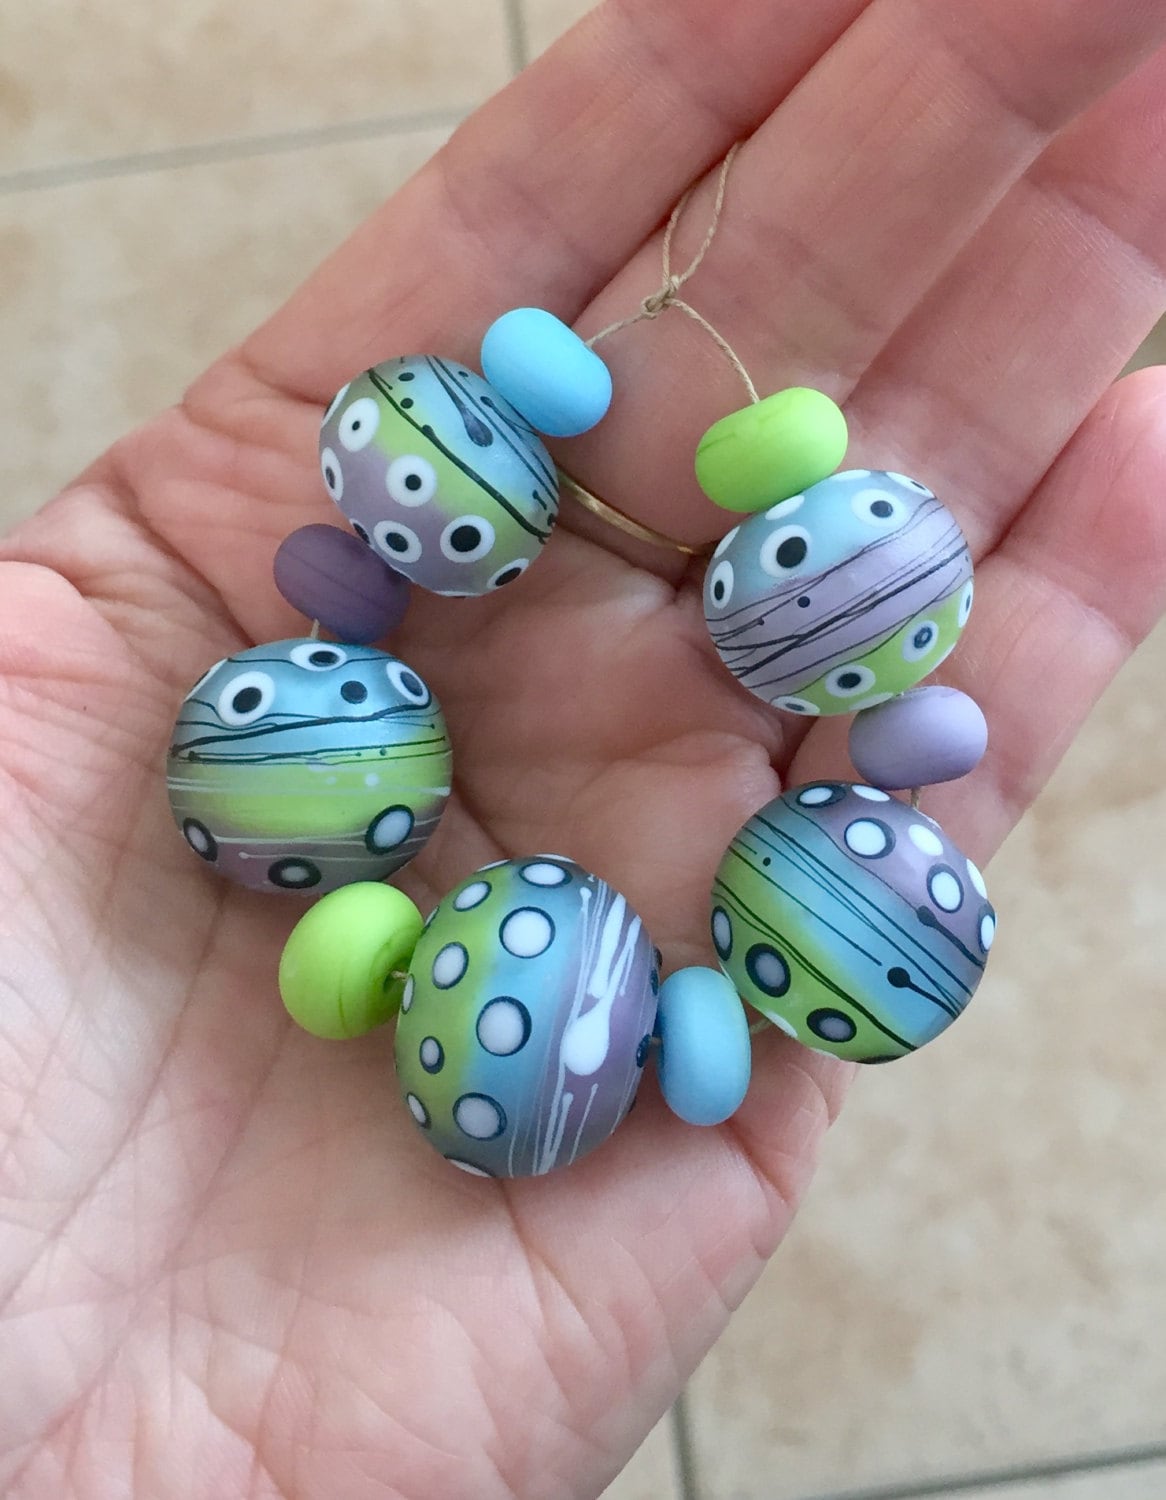 Set of 5 Colorful Handcrafted Lampwork Glass Beads with Bright